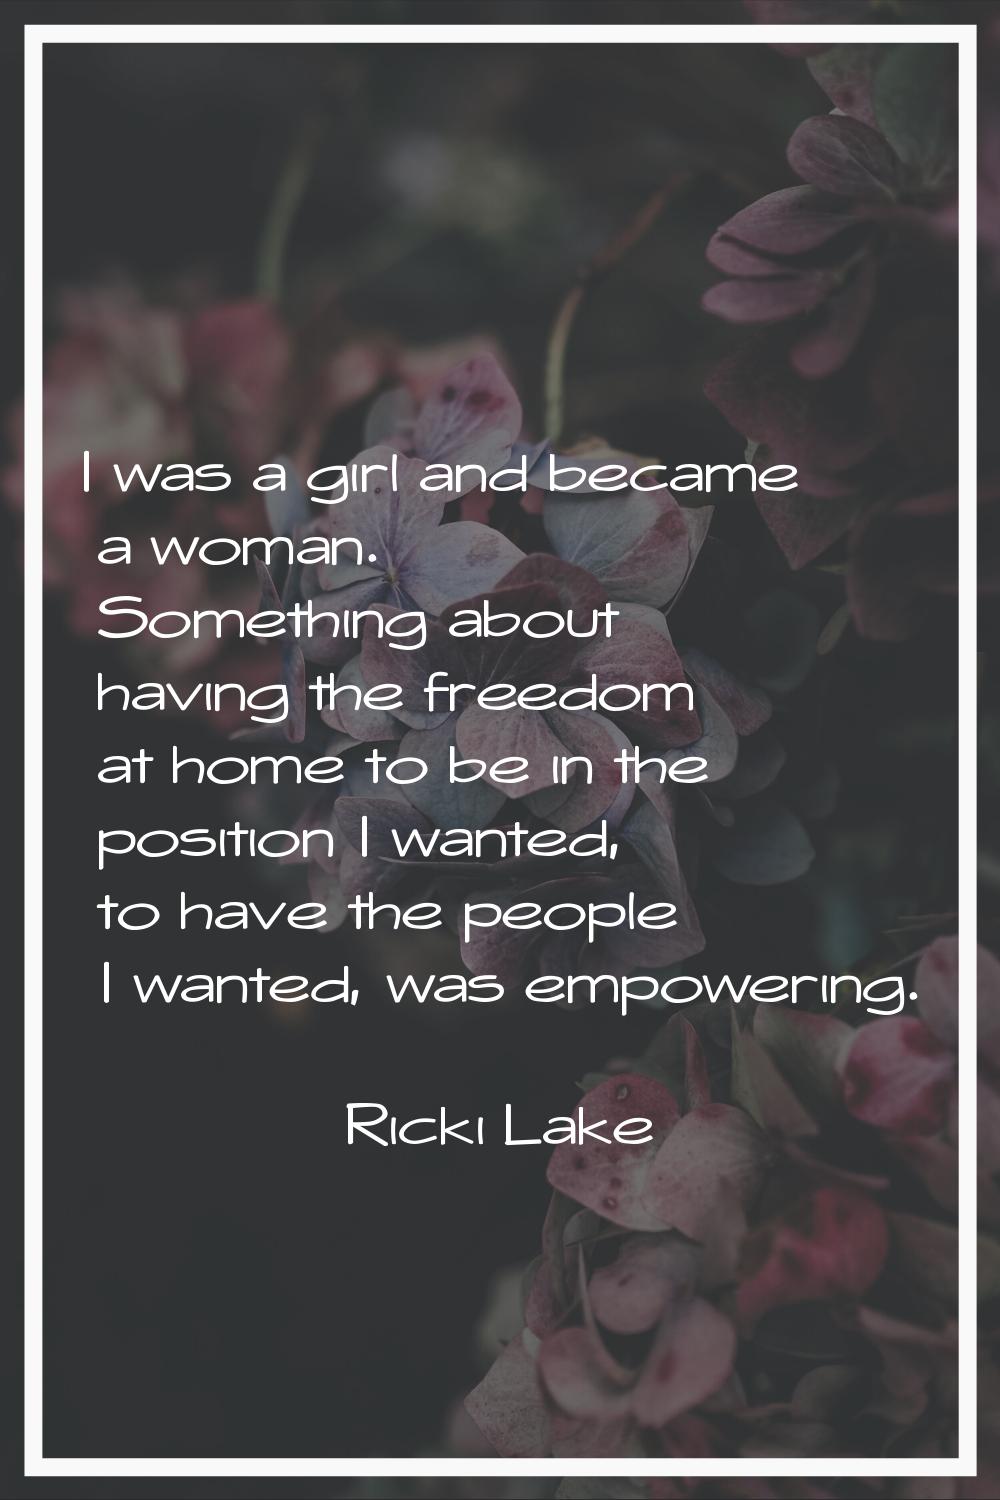 I was a girl and became a woman. Something about having the freedom at home to be in the position I